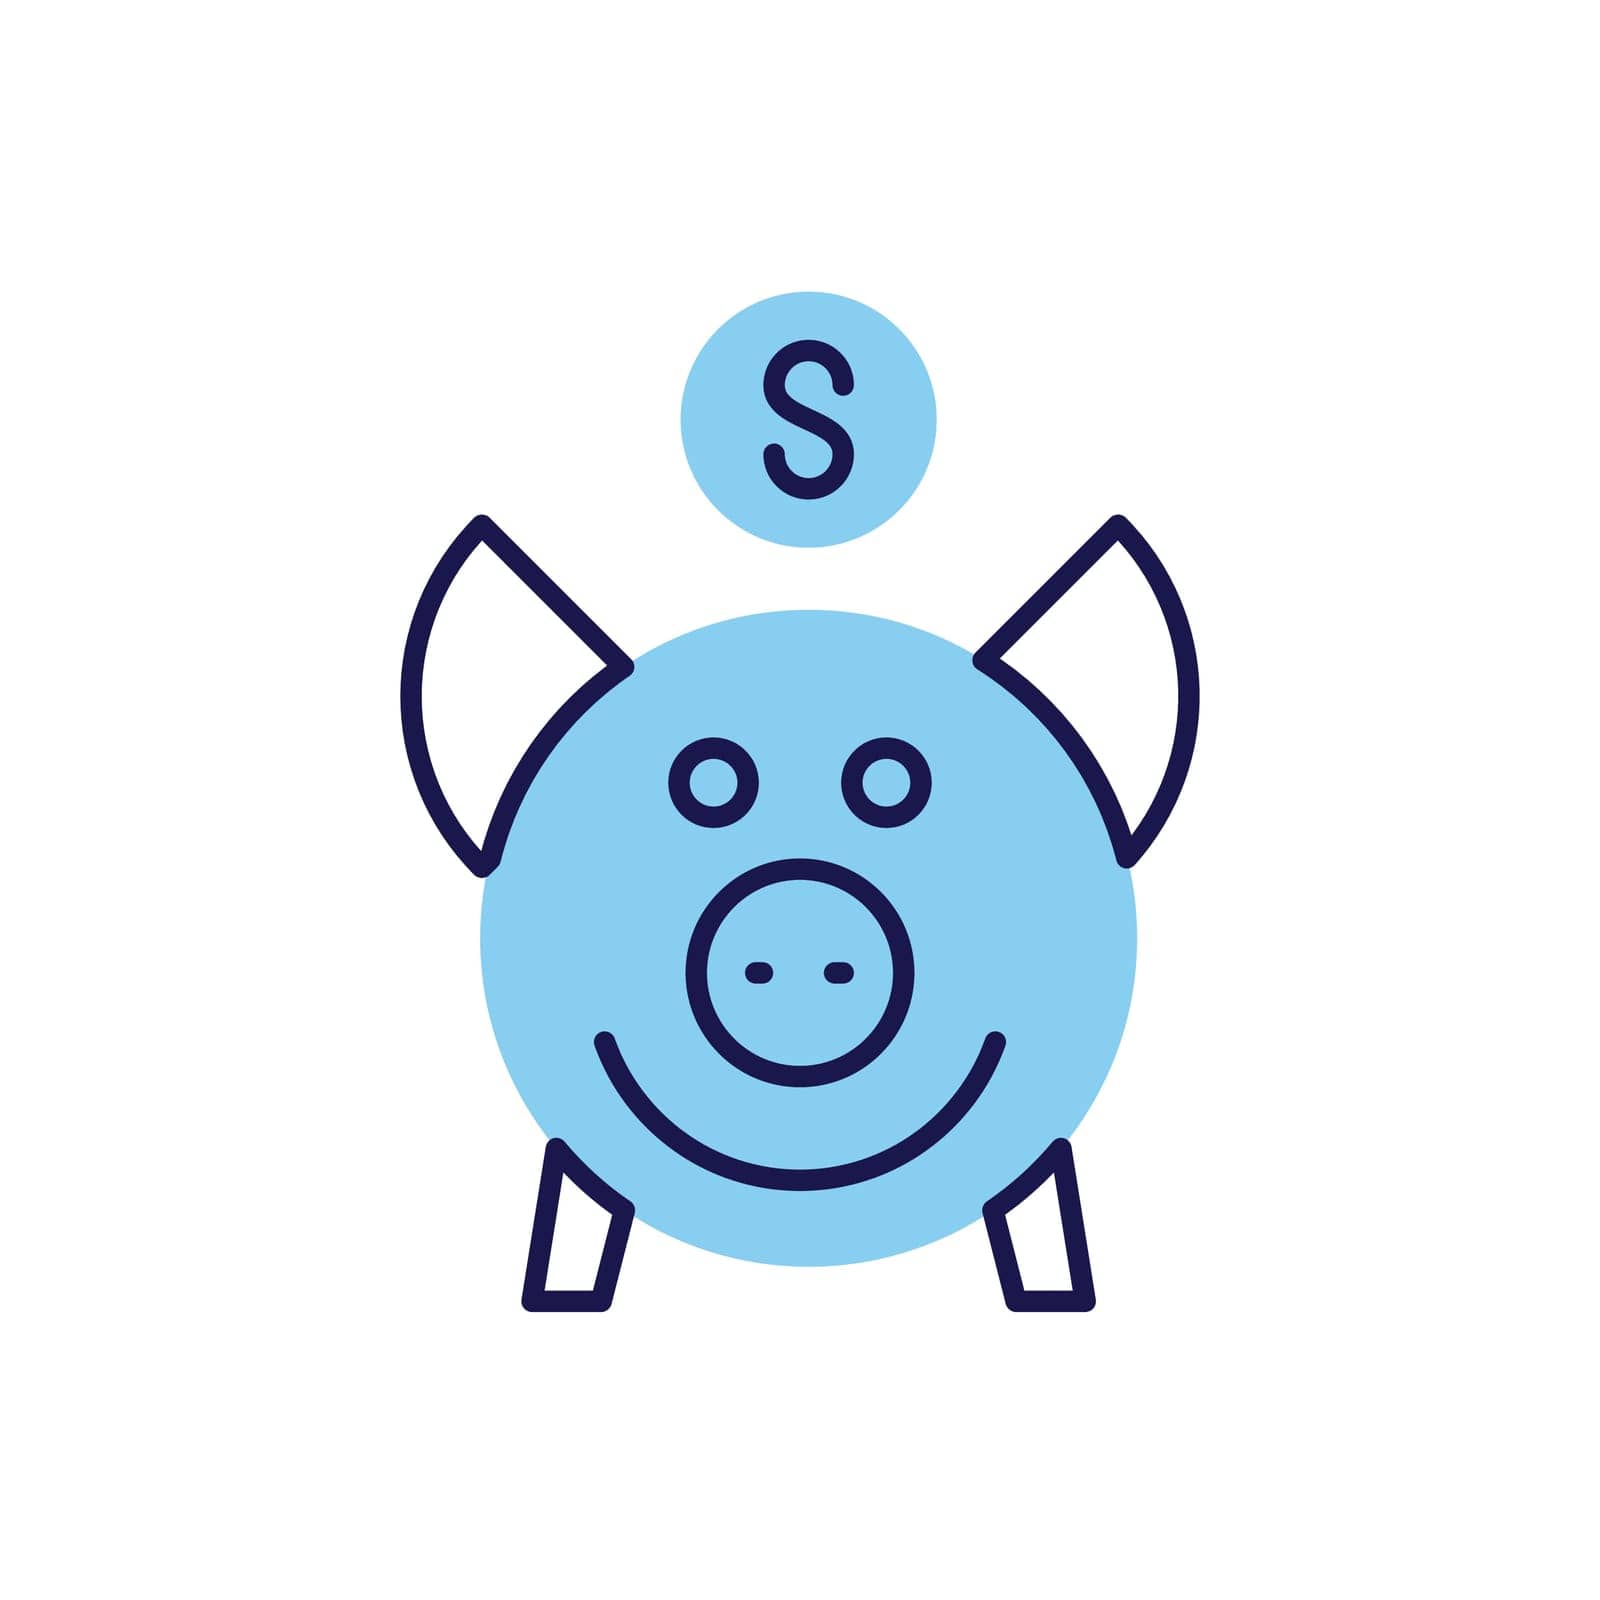 Piggy Bank related vector icon. Isolated on white background. Vector illustration